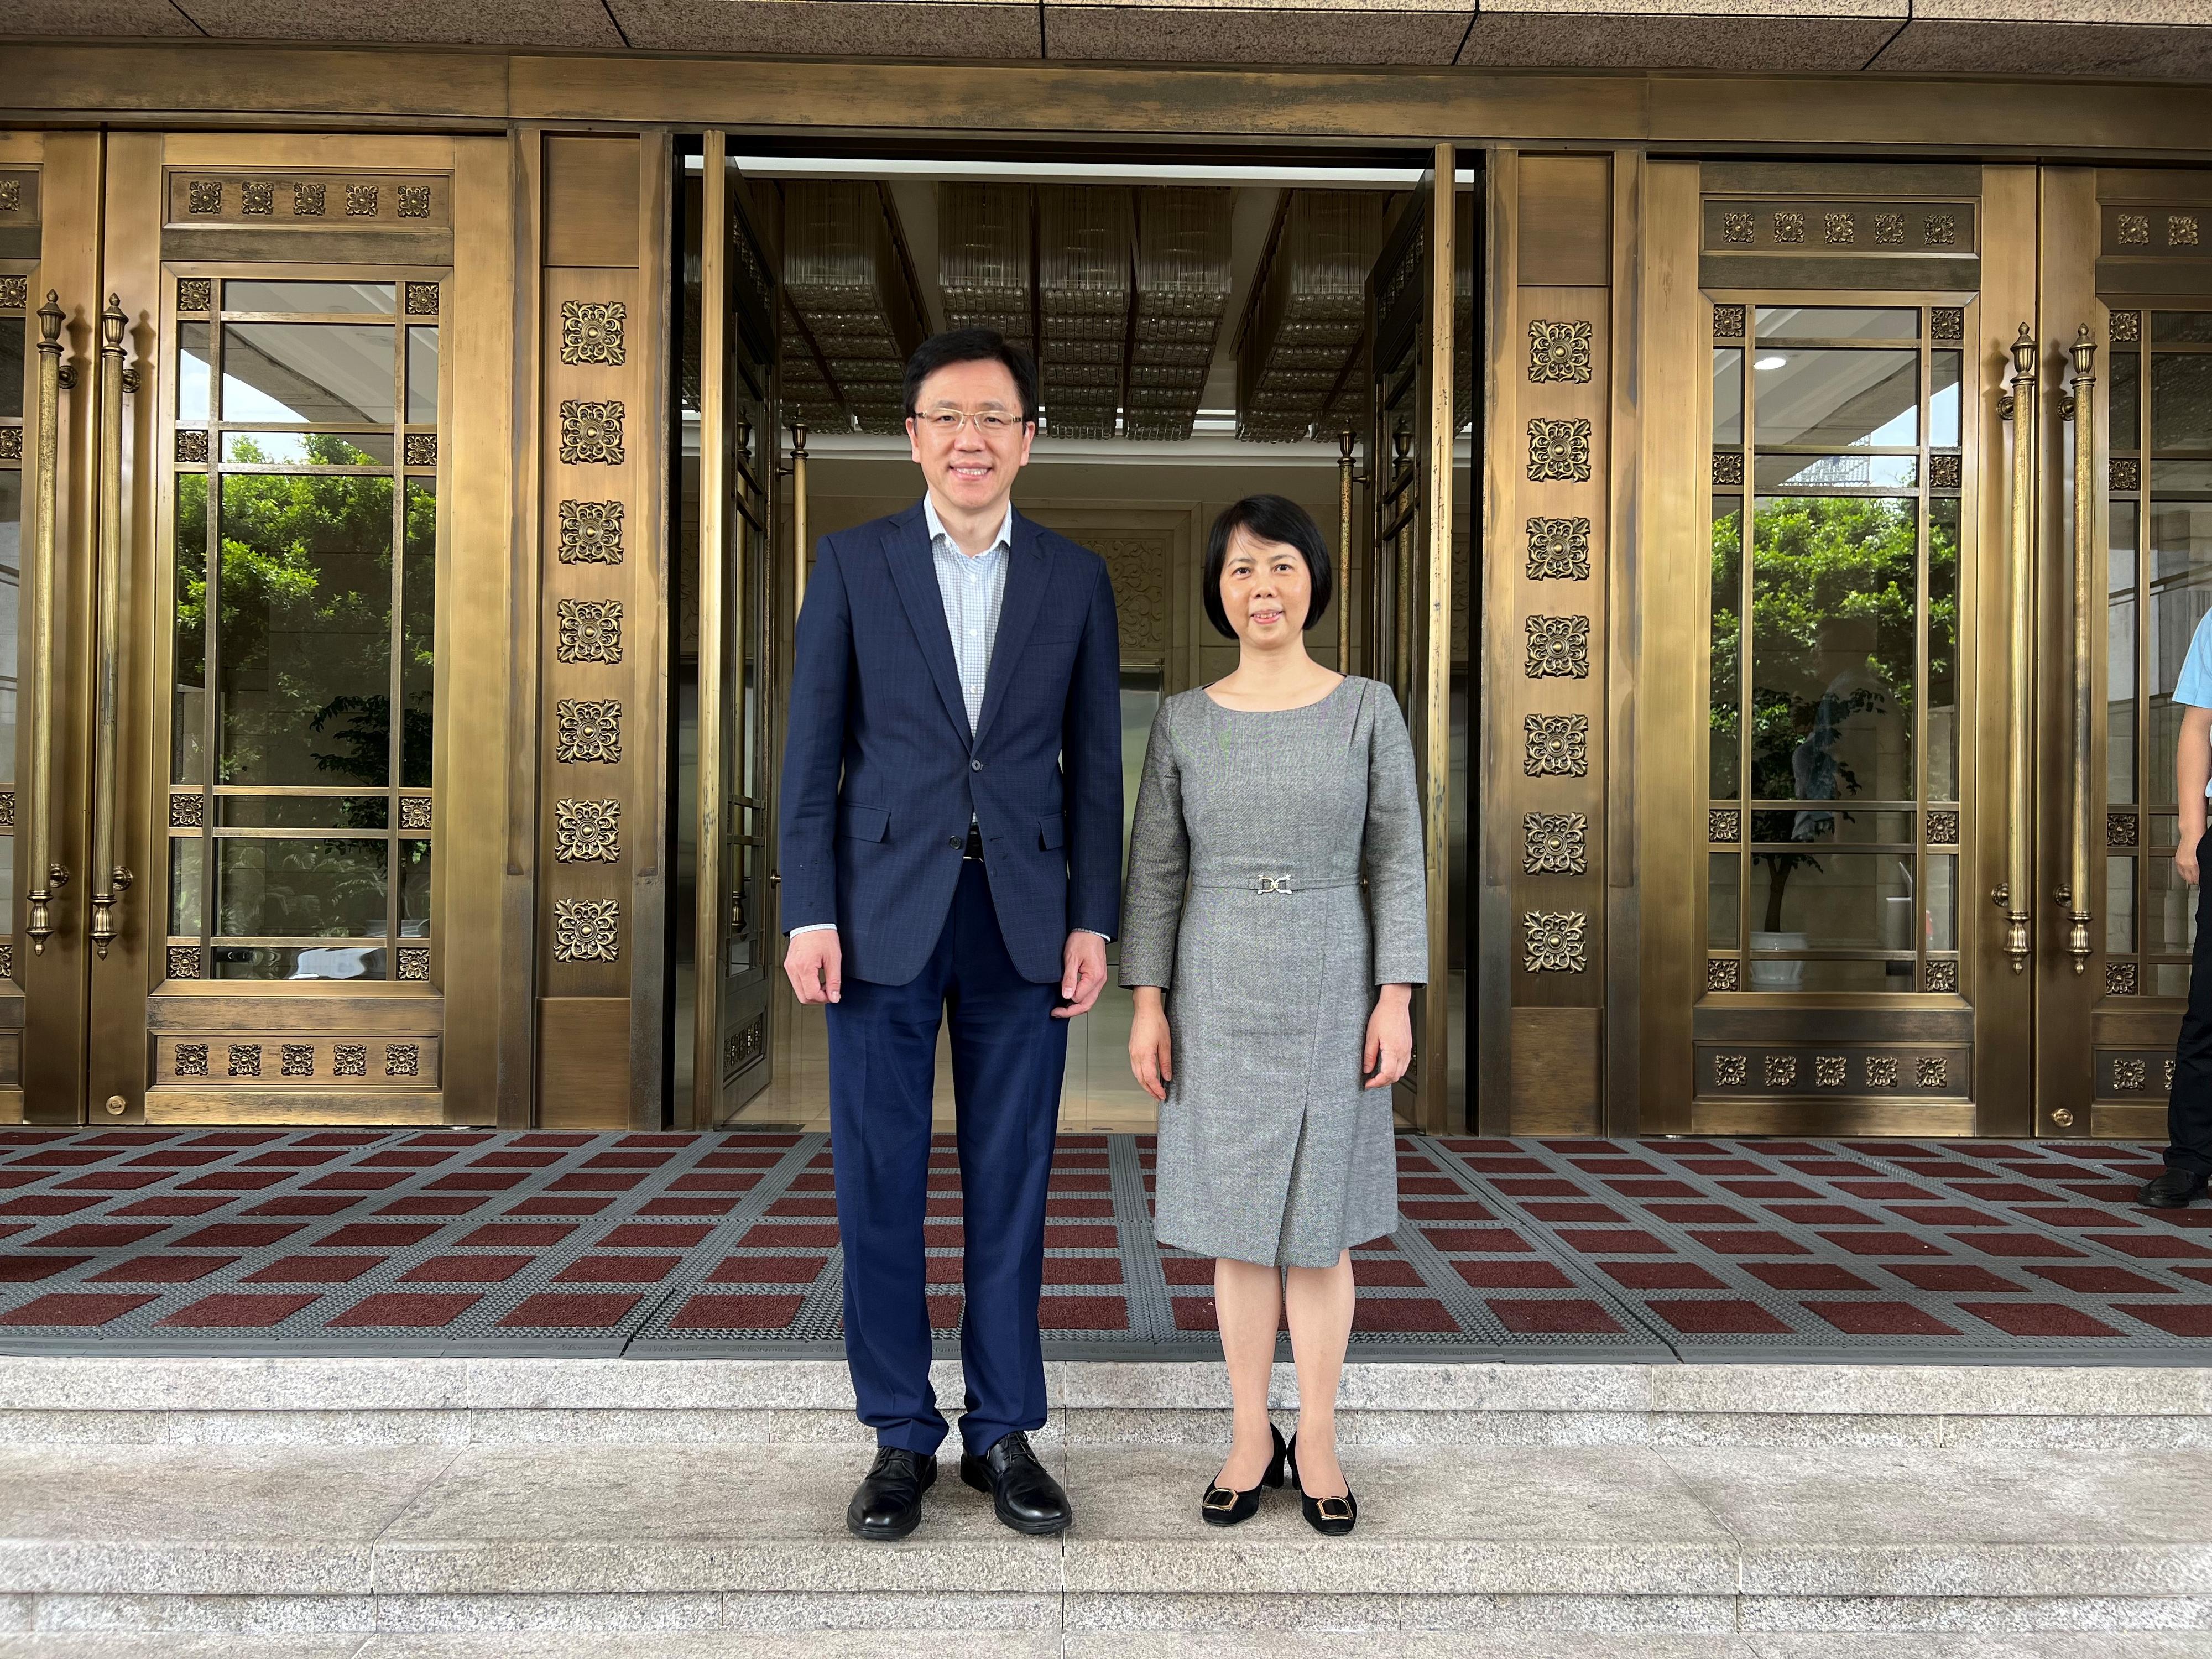 The Secretary for Innovation, Technology and Industry, Professor Sun Dong (left), visits the Chongqing State-owned Assets Supervision and Administration Commission in Chongqing today (May 12) and meets with the Party Committee Member and Deputy Director, Ms Chen Yan (right), to discuss promoting co-operation and exchanges between the technology industries of Chongqing and Hong Kong.